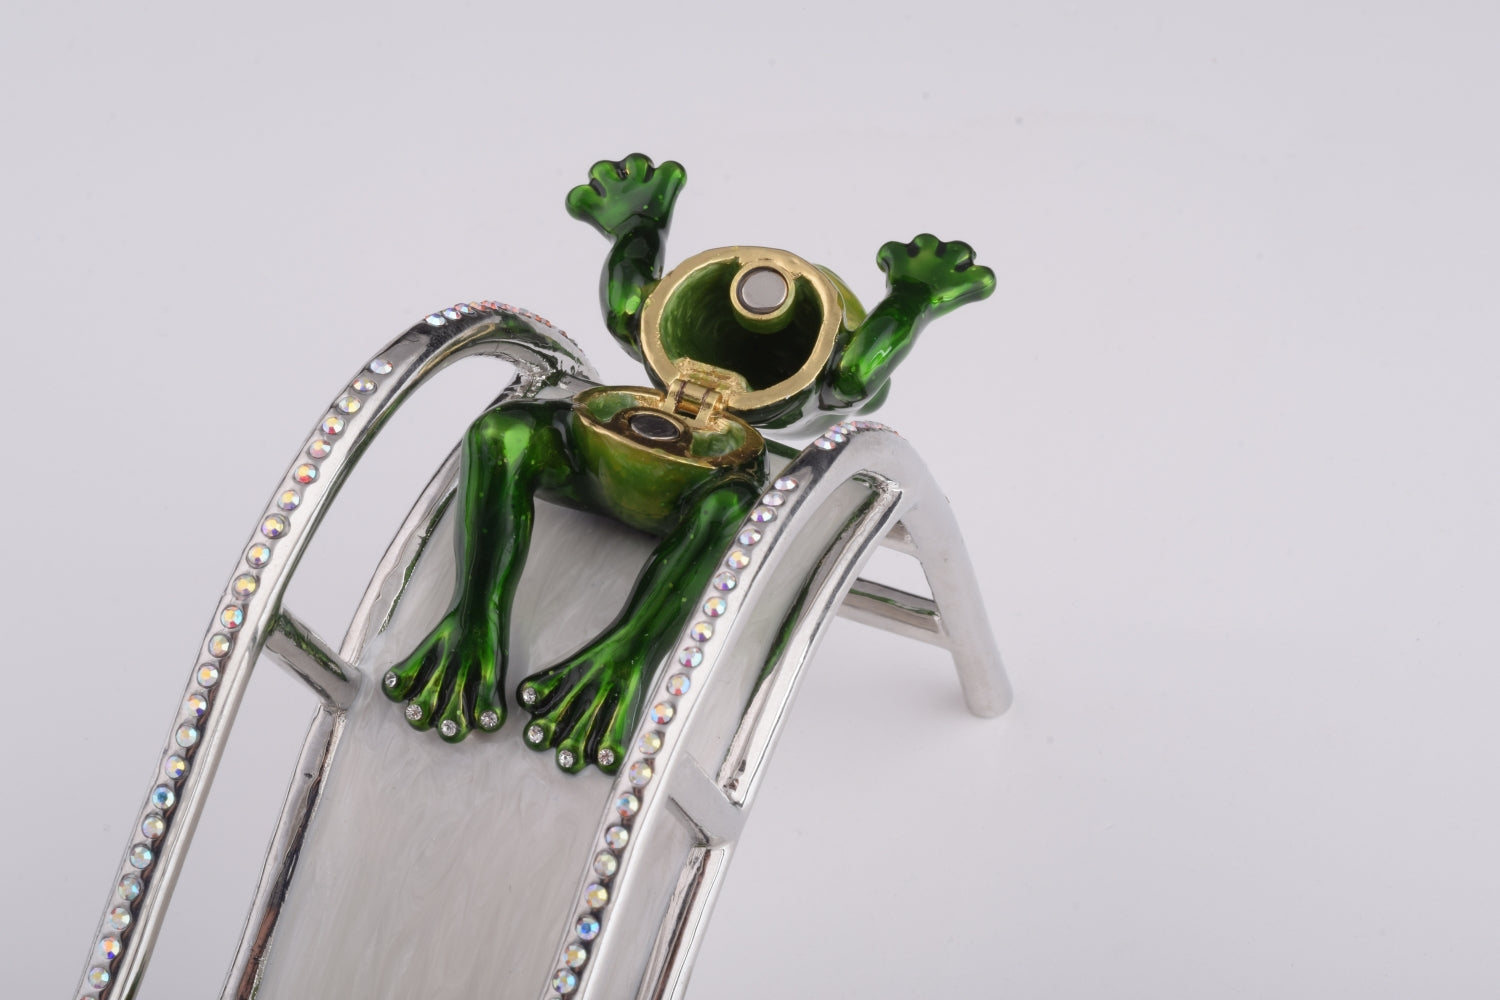 Two Frogs Riding Slide